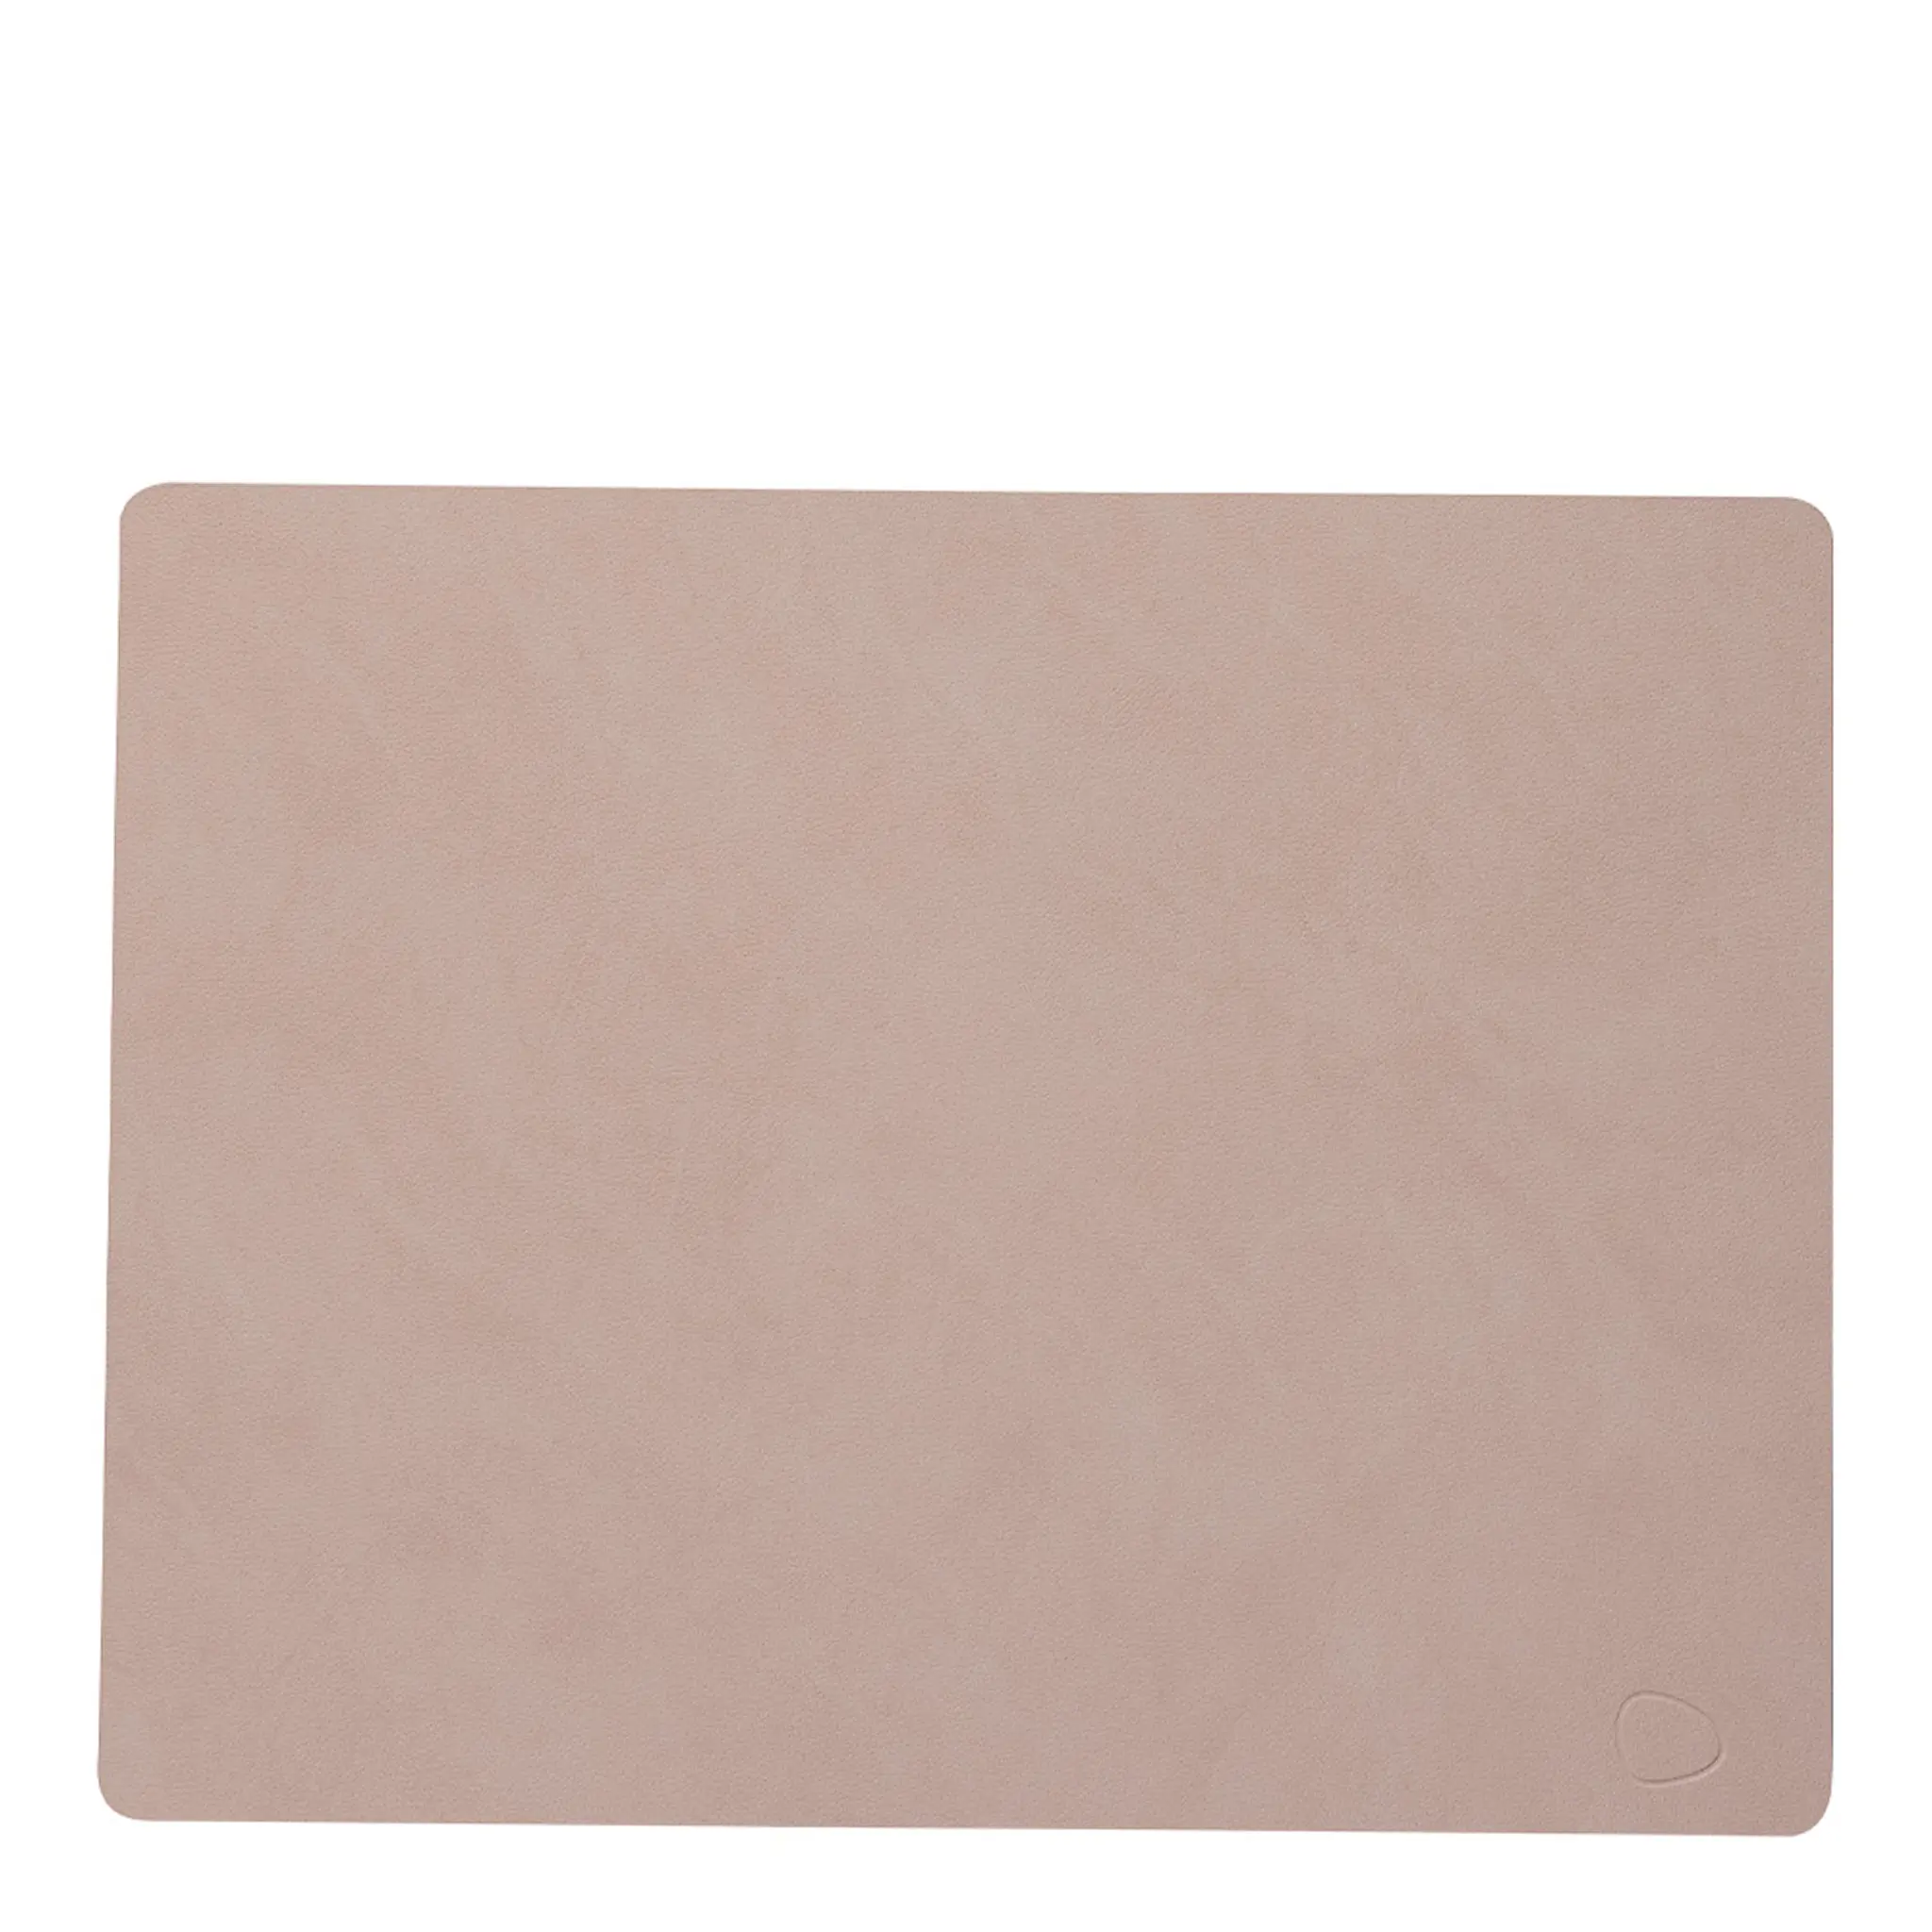 LIND dna Nupo Square Bordstablett 35x45 cm Clay Brown